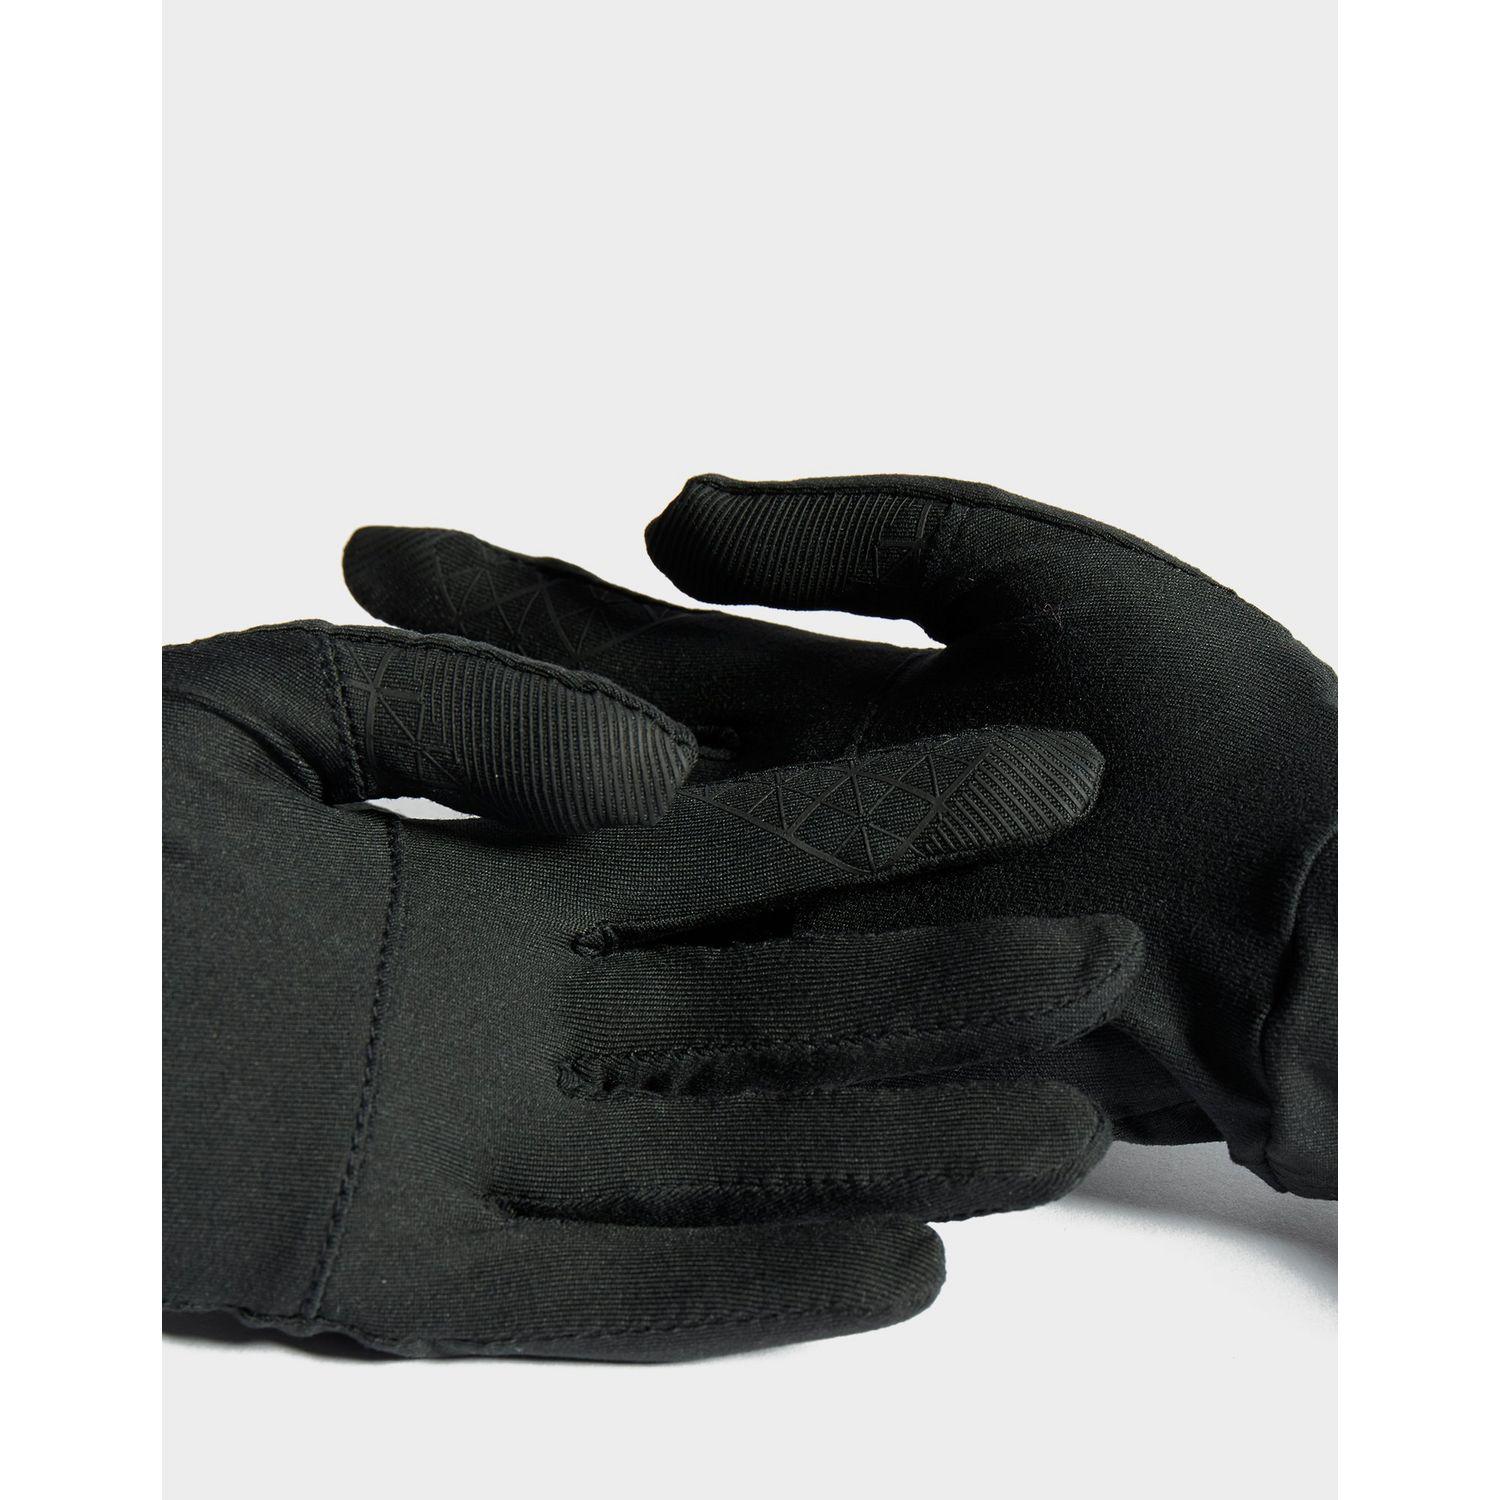 Nike Synthetic Dri-fit Element Gloves in Black/Silver (Black) - Lyst